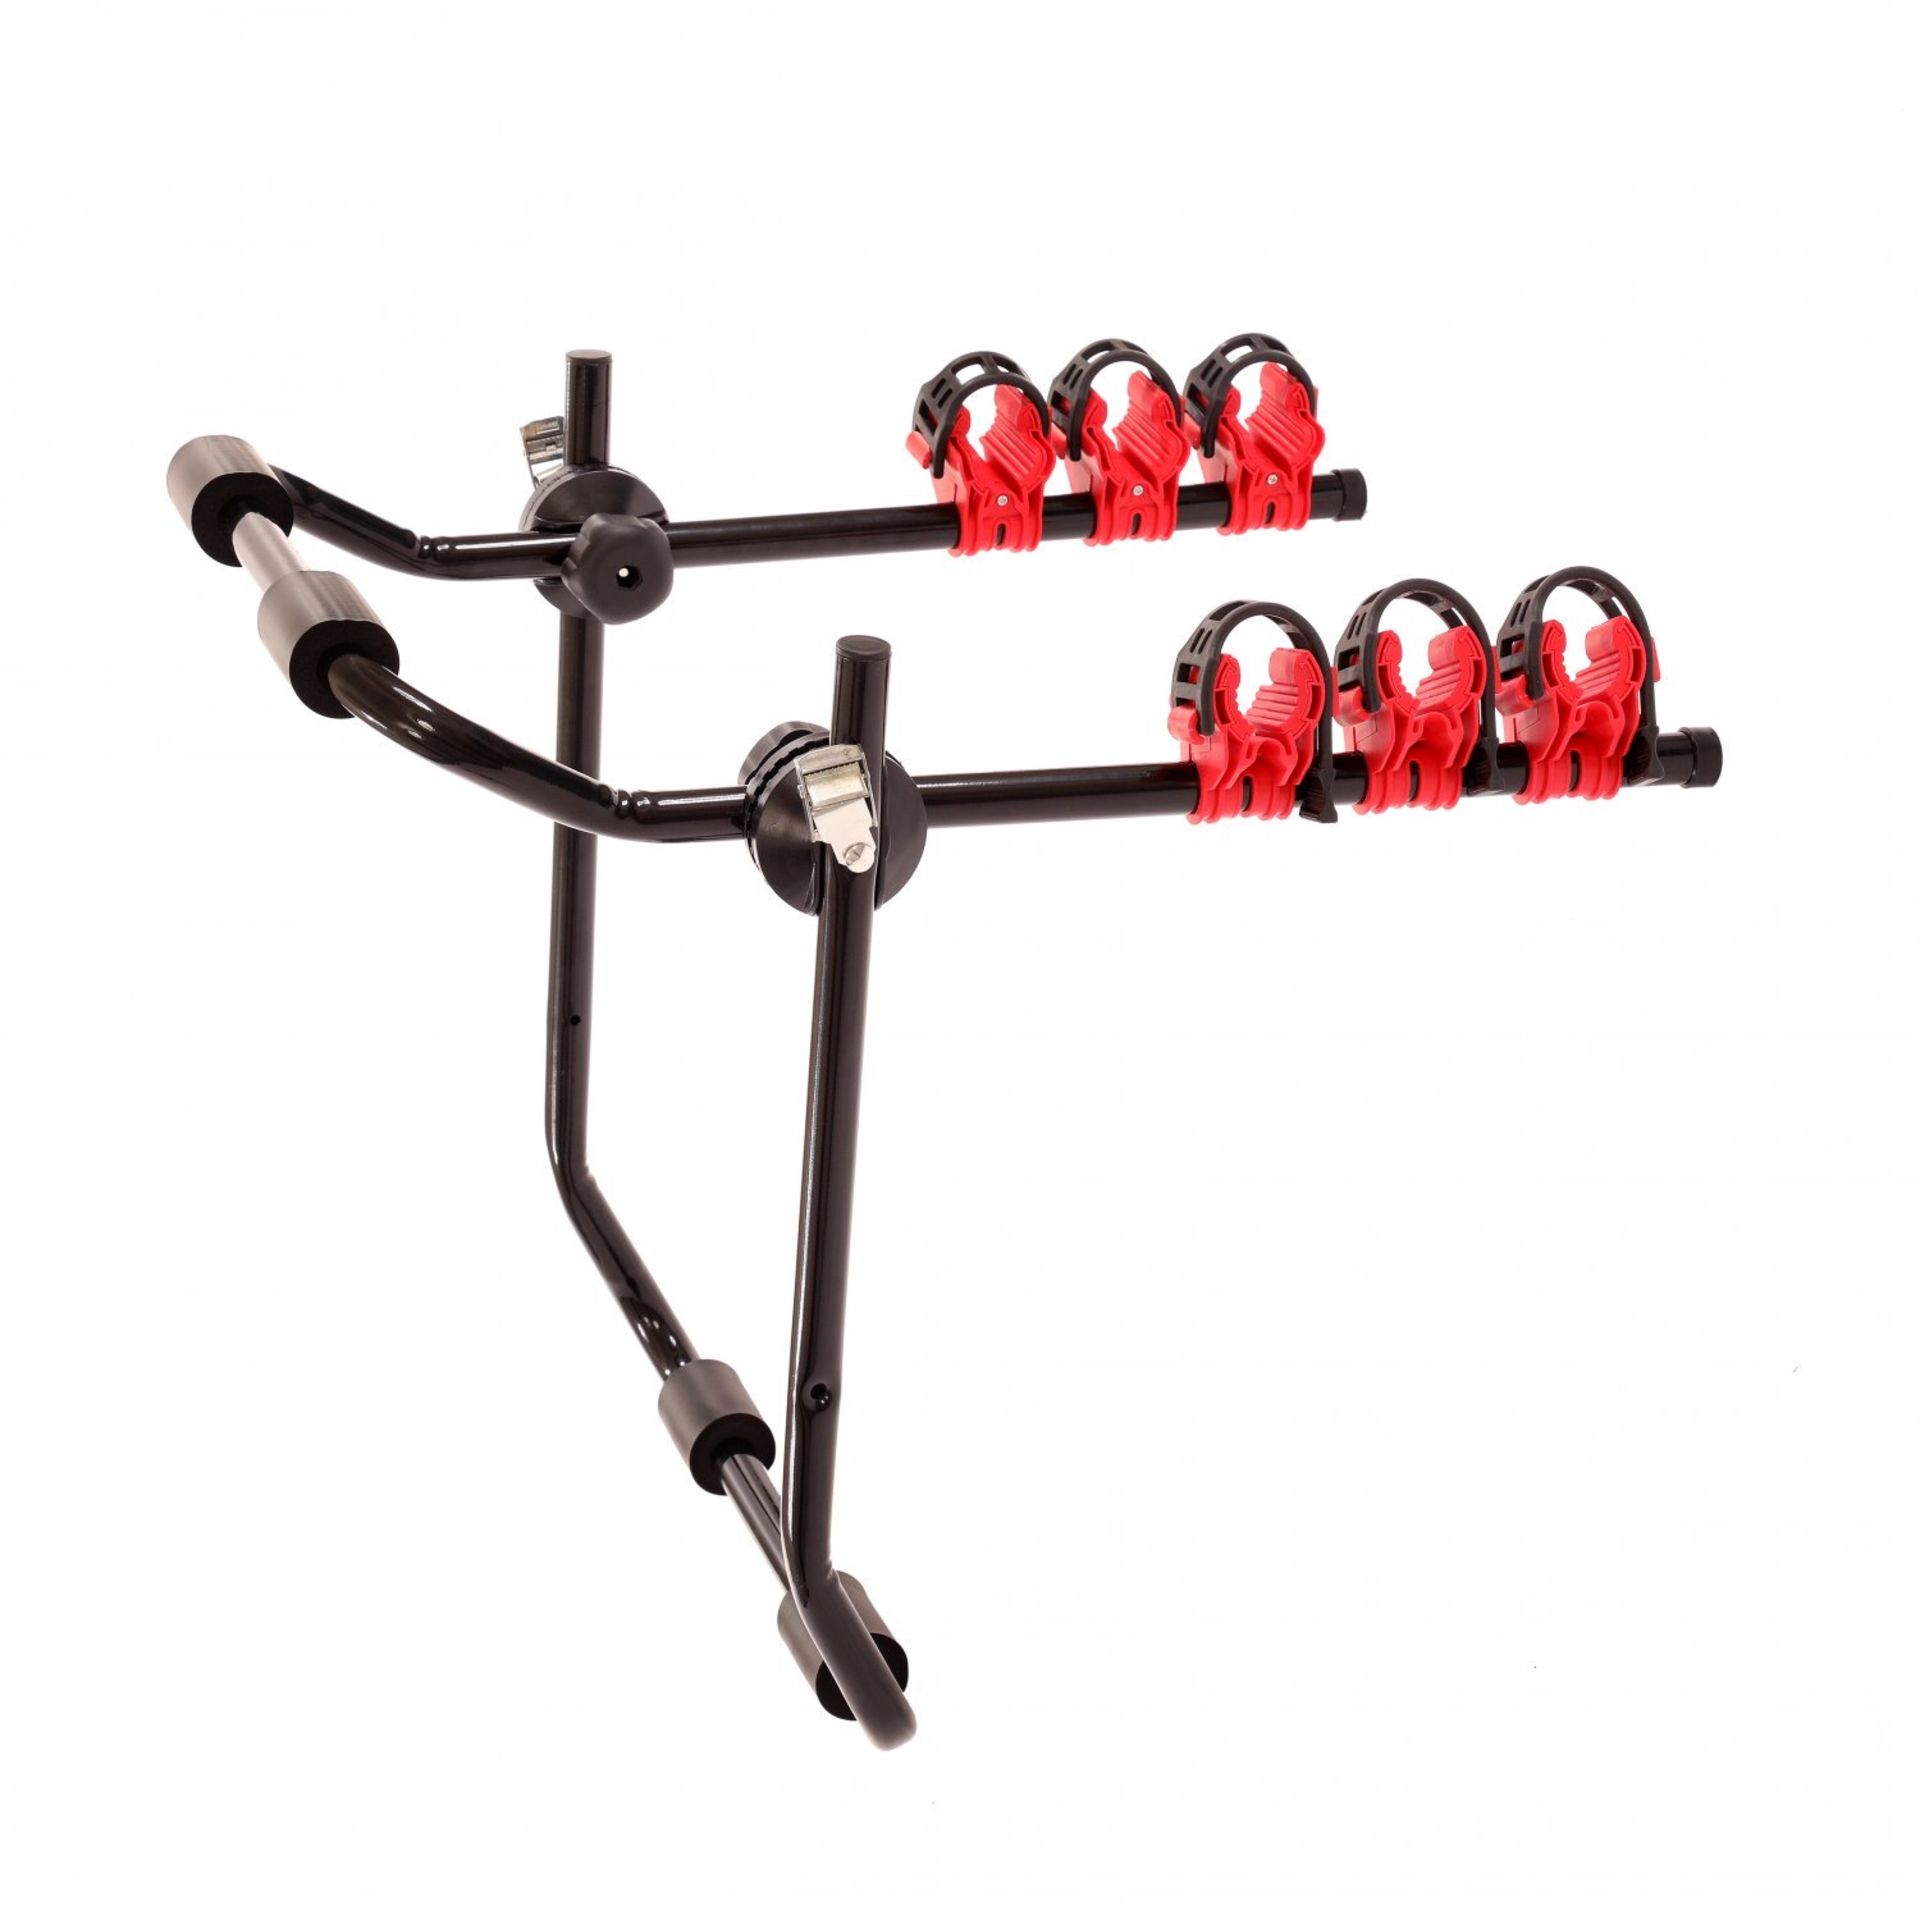 (L43) Universal 3 Bike Bicycle Hatchback Car Mount Rack Stand Carrier Size: 70 x 47.5cm, Weigh...